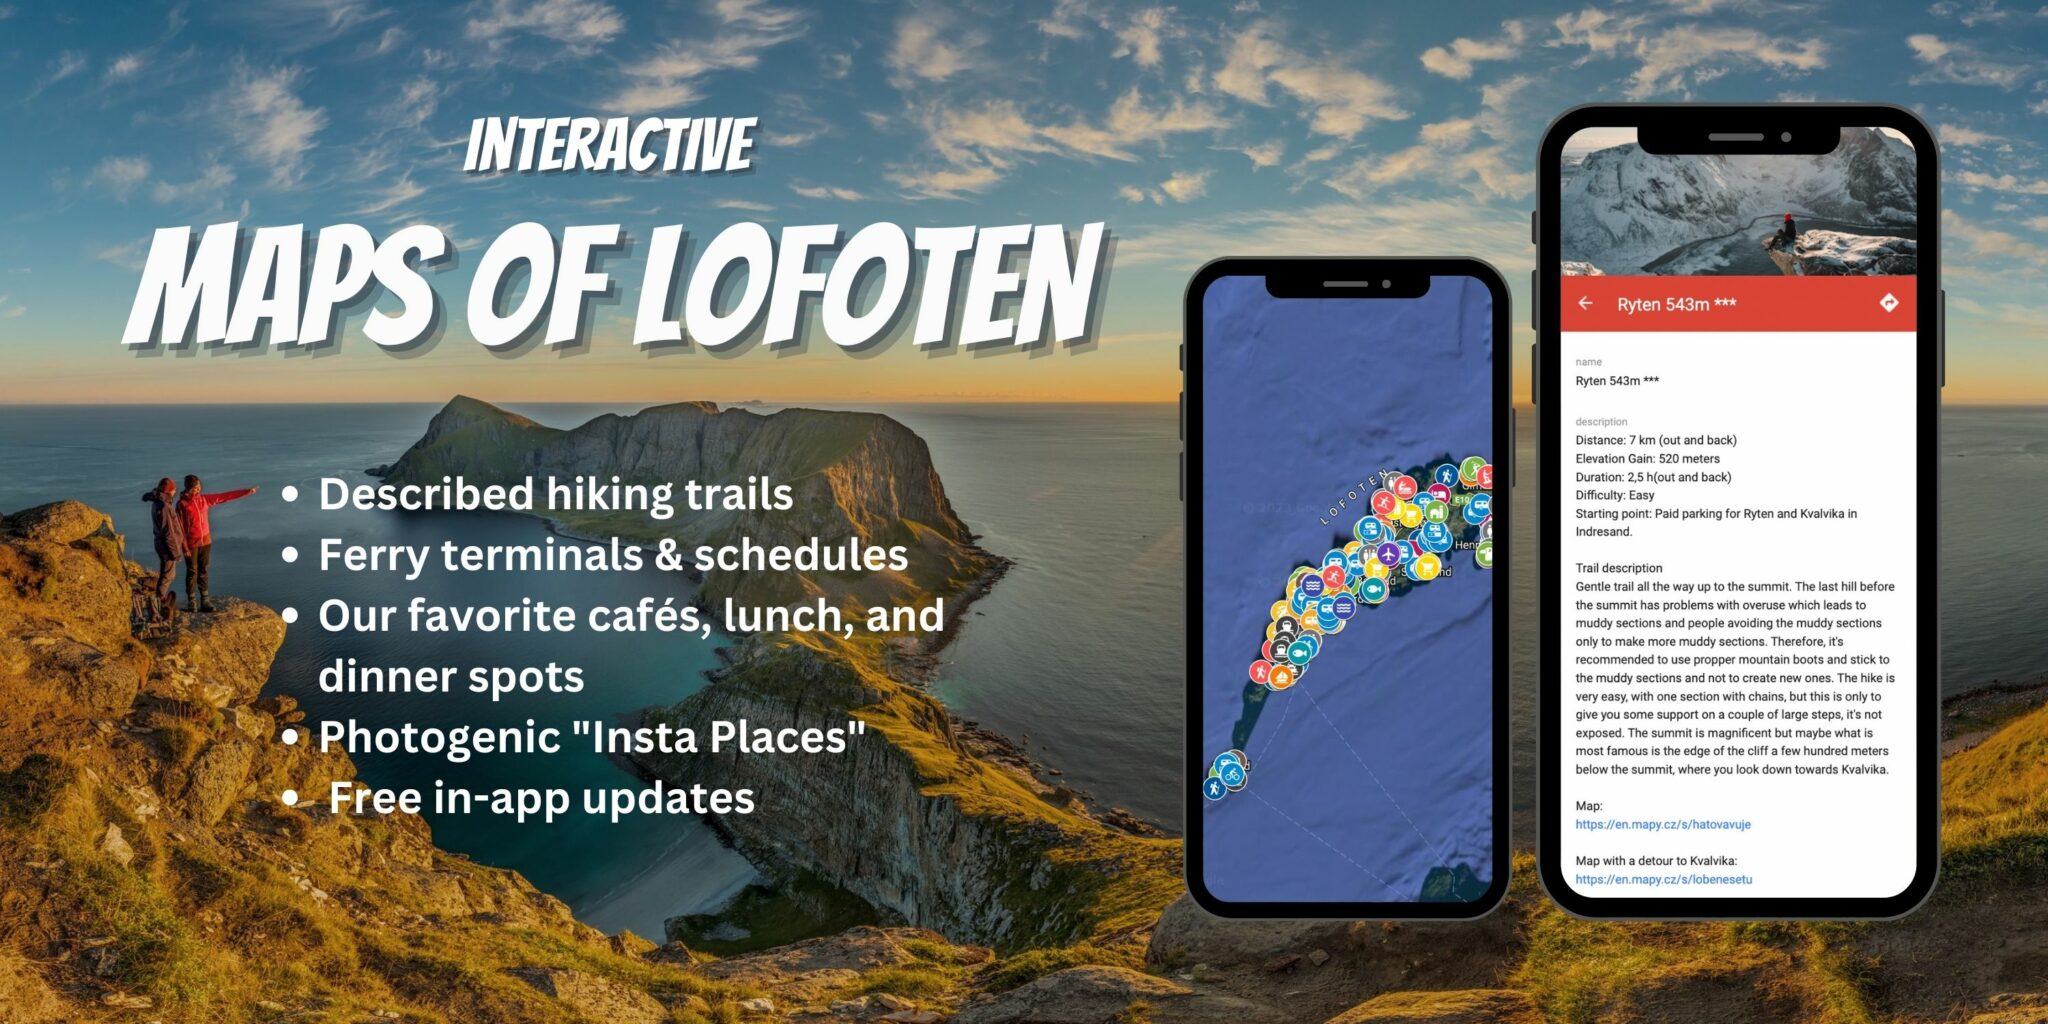 Maps of Lofoten for hiking and camping